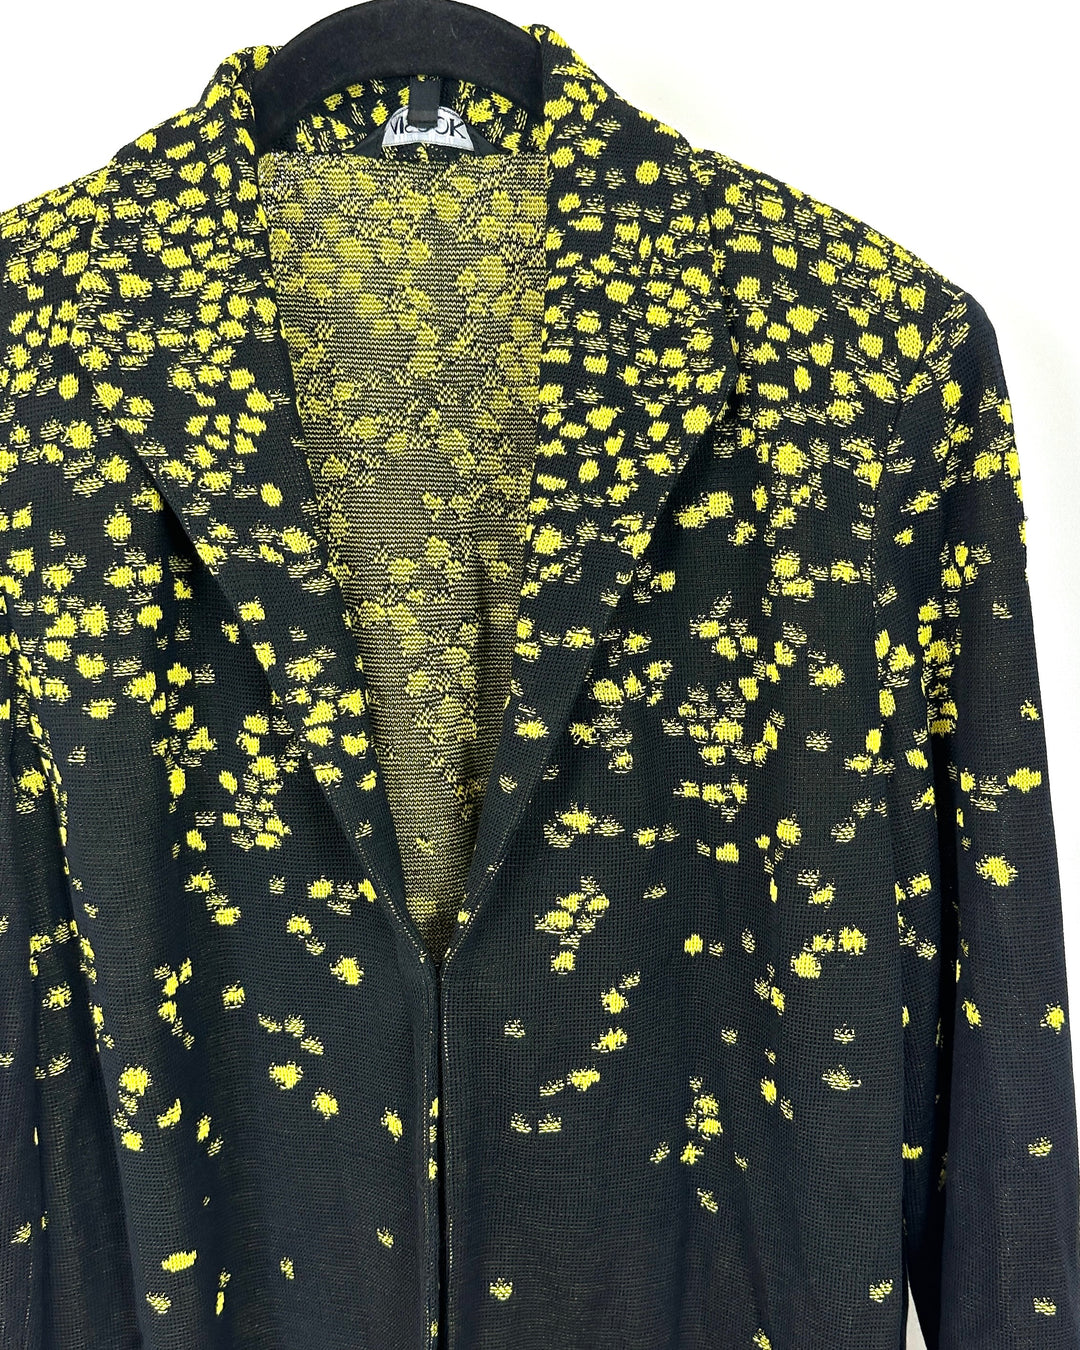 Long Black and Yellow Speckled Cardigan - Size 2/4